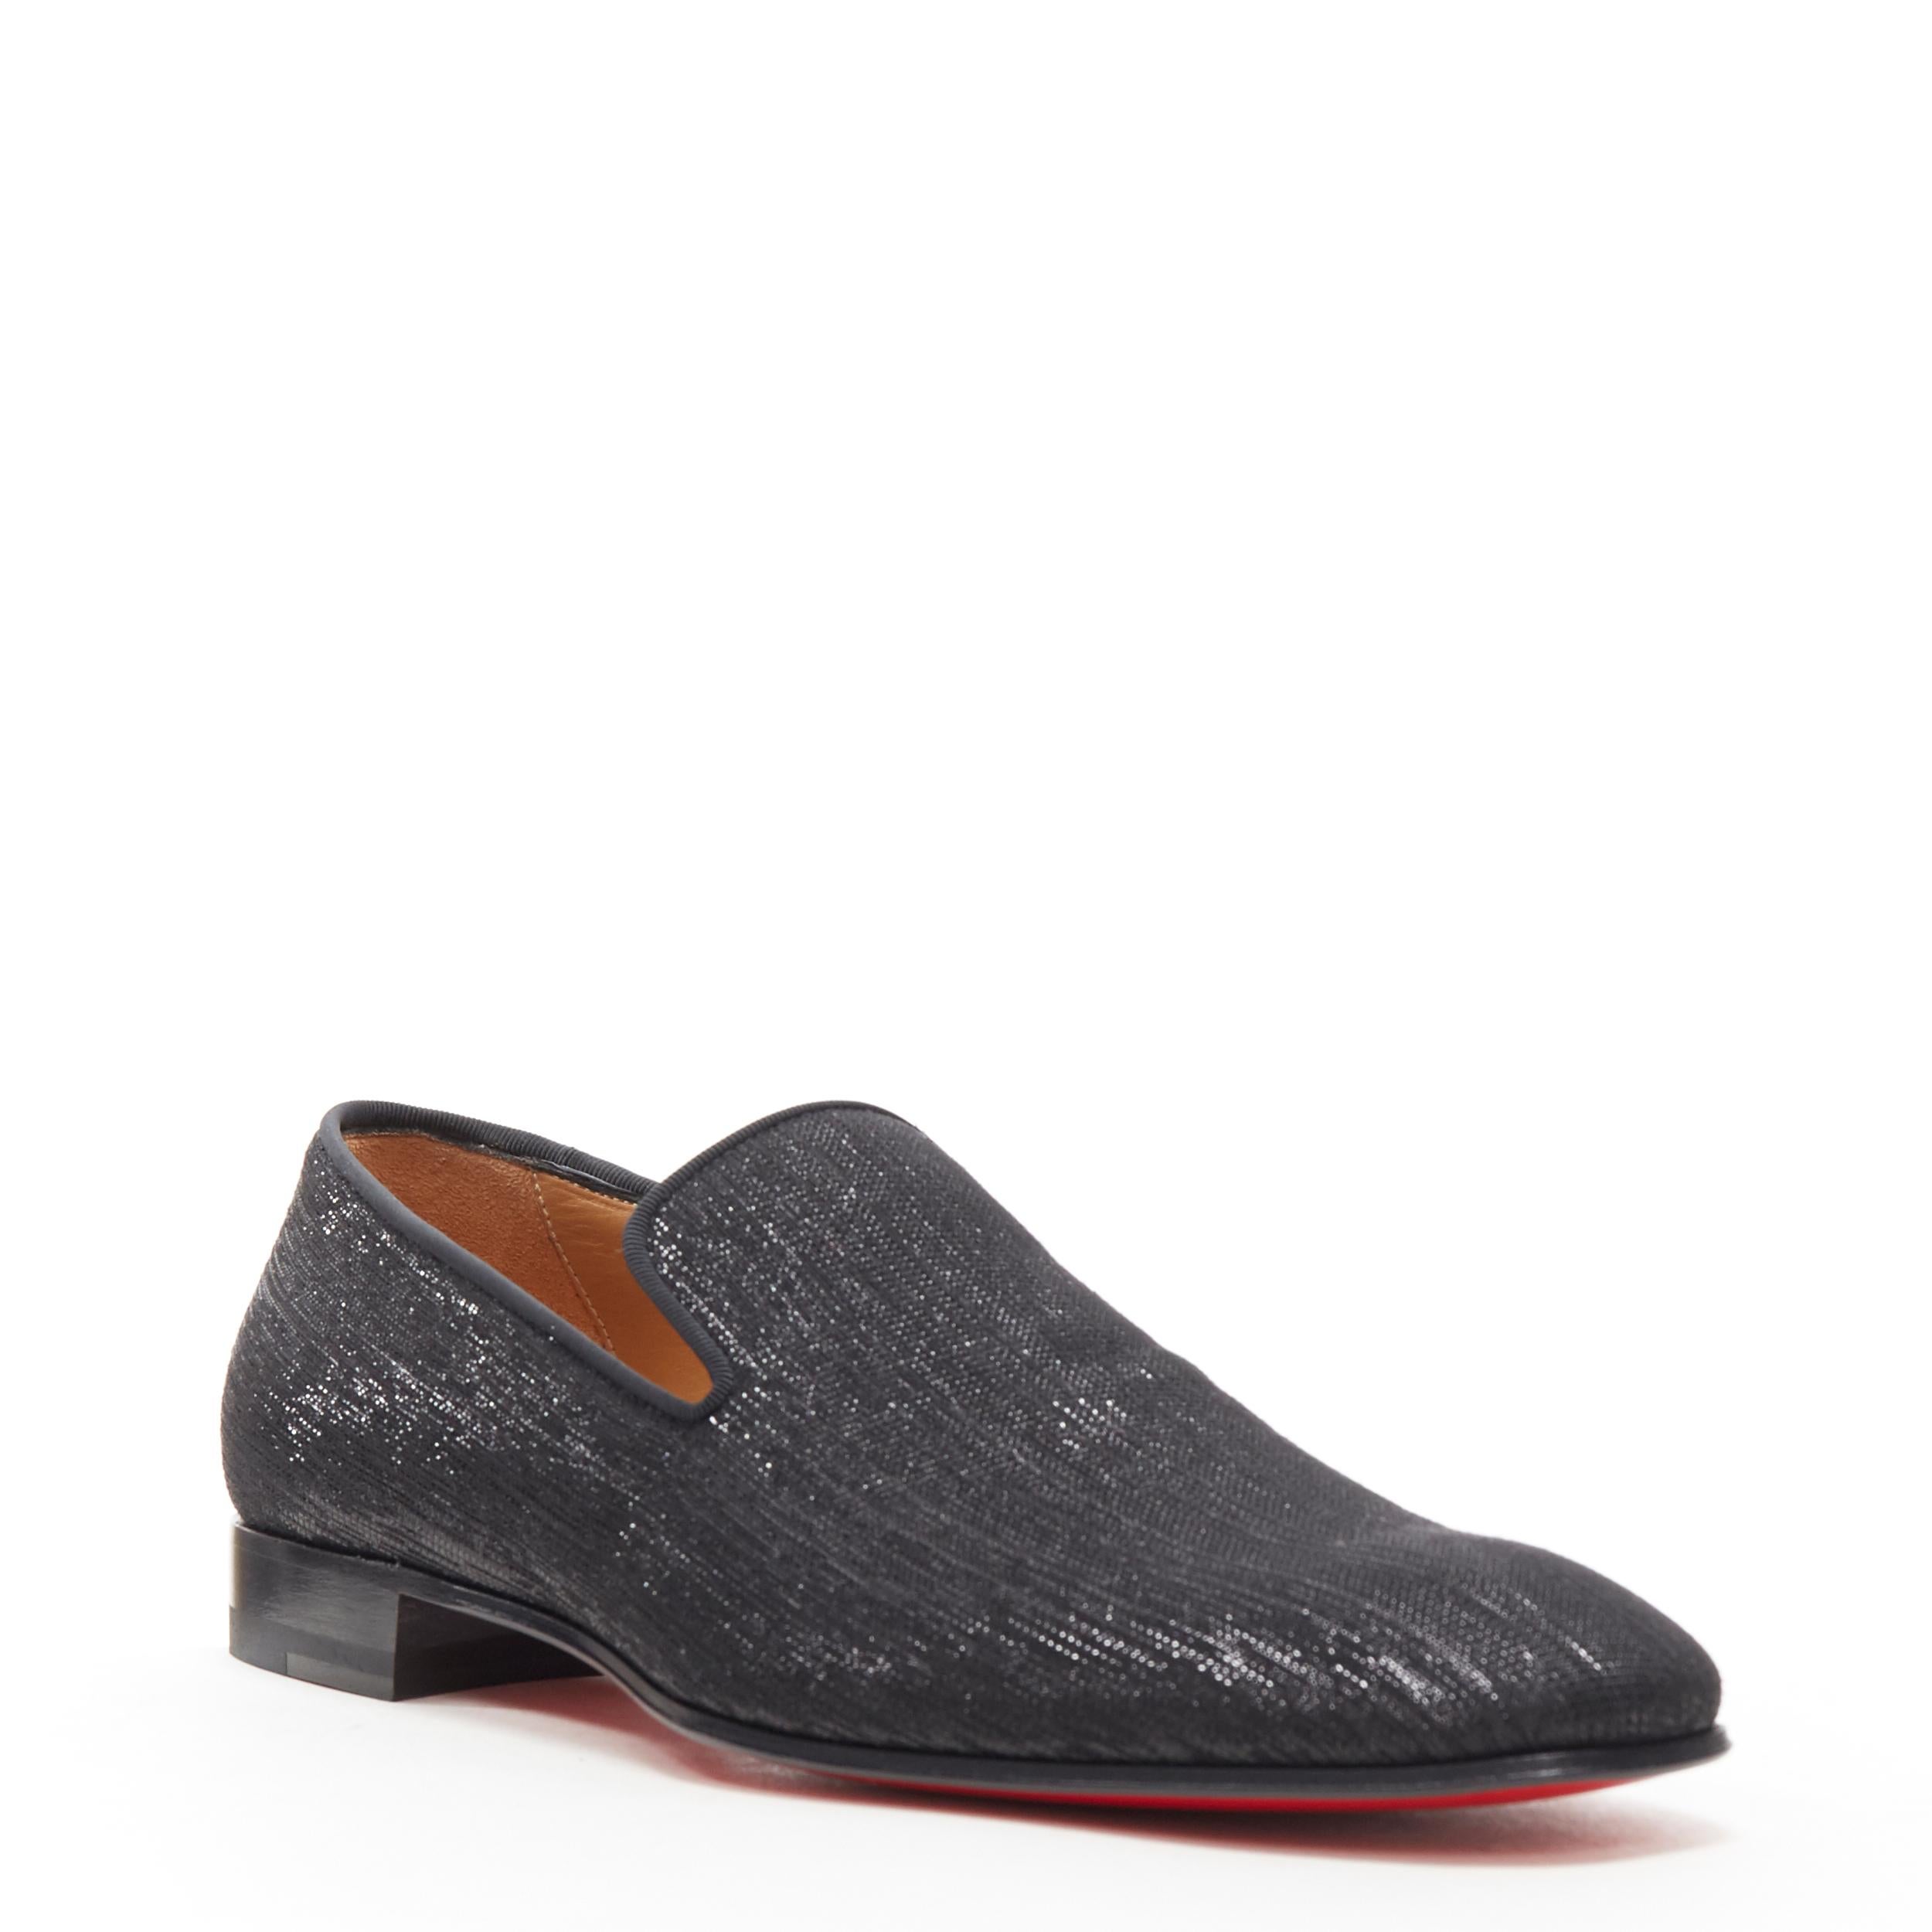 new CHRISTIAN LOUBOUTIN Dandelion Flat Shantung Diams black loafer shoes EU39
Brand: Christian Louboutin
Designer: Christian Louboutin
Model Name / Style: Dandelion
Material: Fabric
Color: Black
Pattern: Solid
Closure: Slip on
Extra Detail: Style